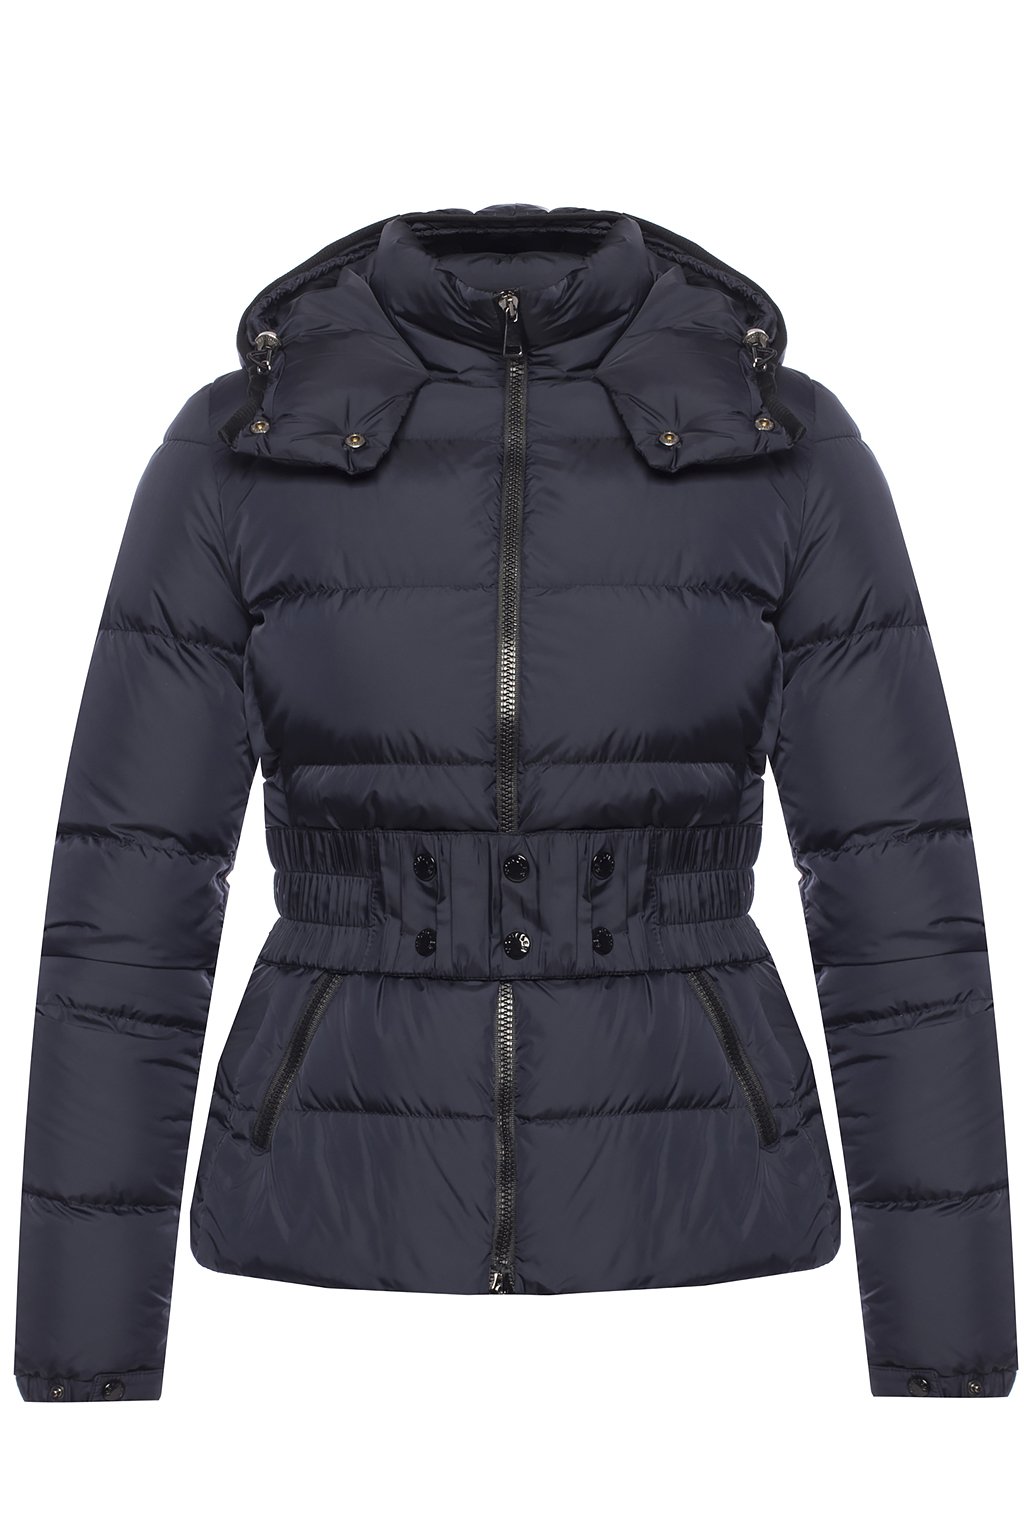 Moncler 'Don Giubbotto' quilted jacket | Women's Clothing | Vitkac